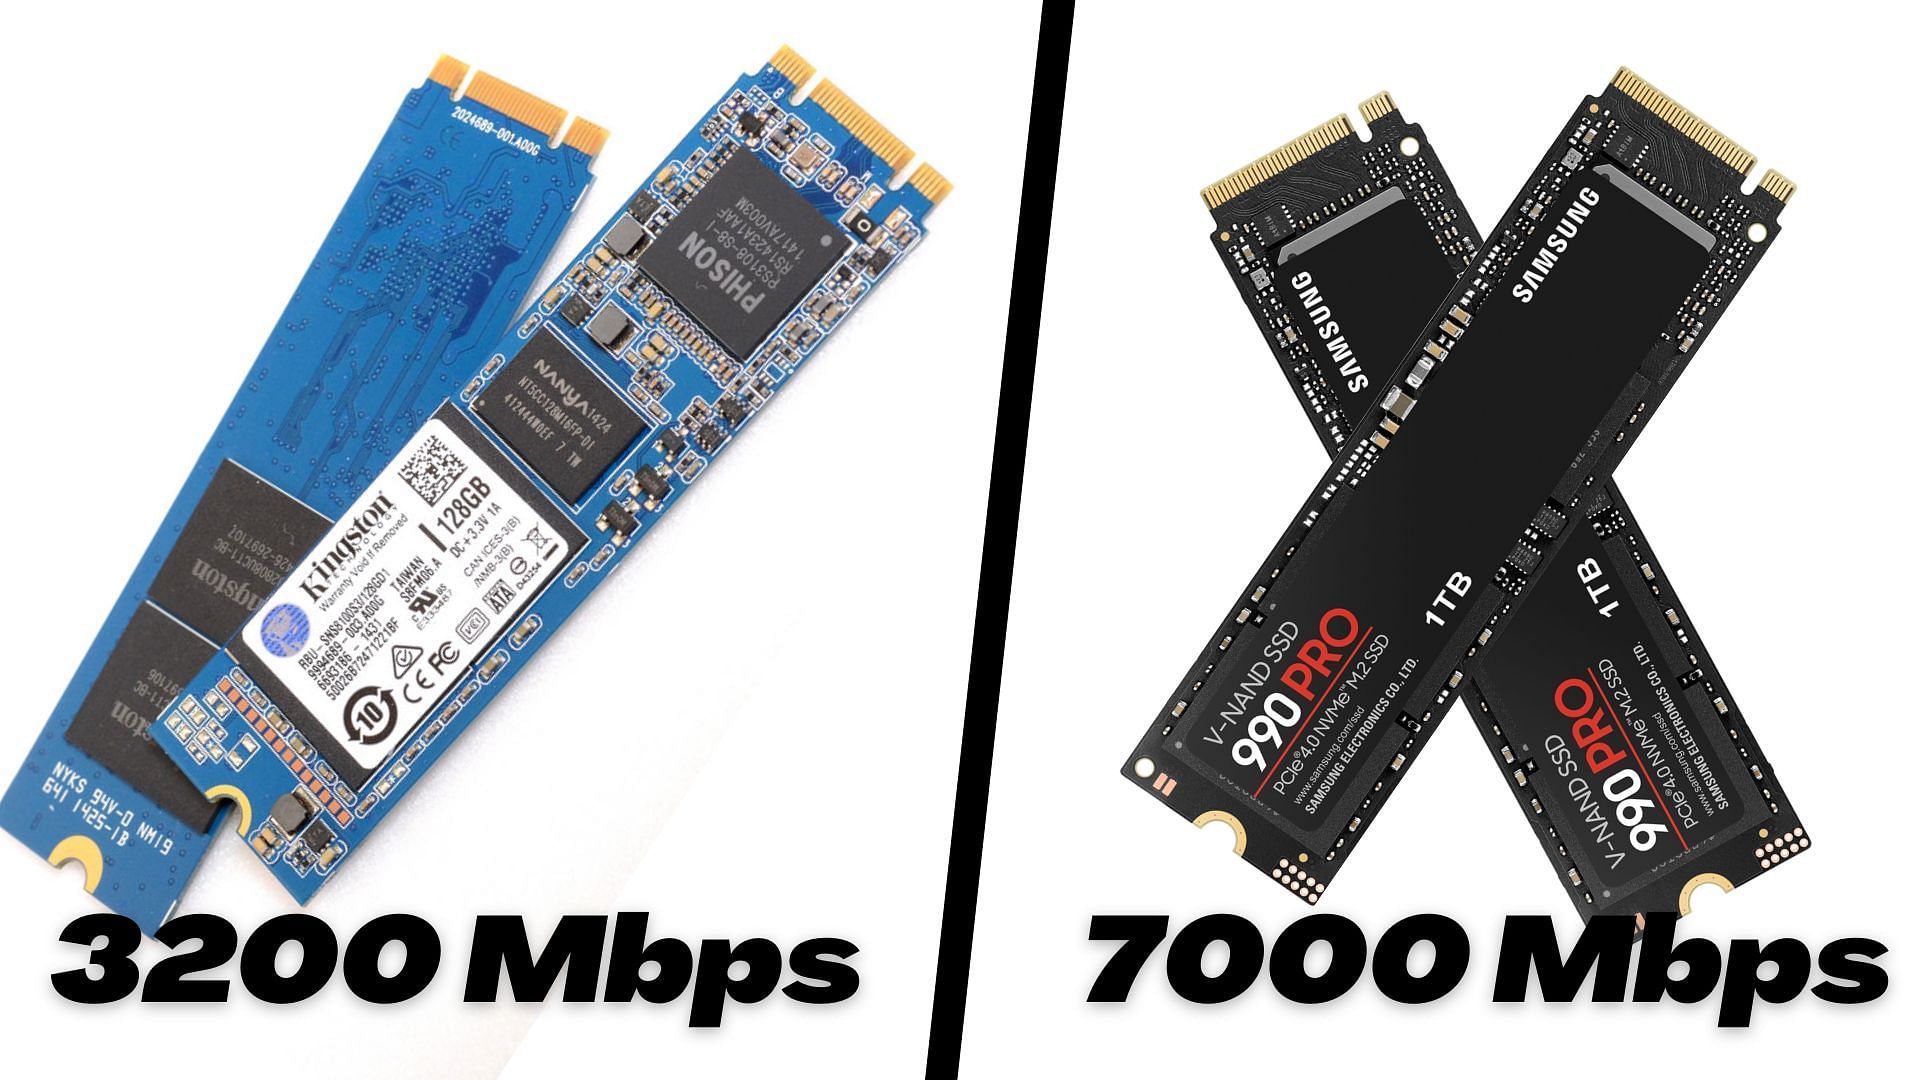 I am sick Record Infect PCIe Gen 4 vs Gen 3: Do you need to spend extra on SSDs?